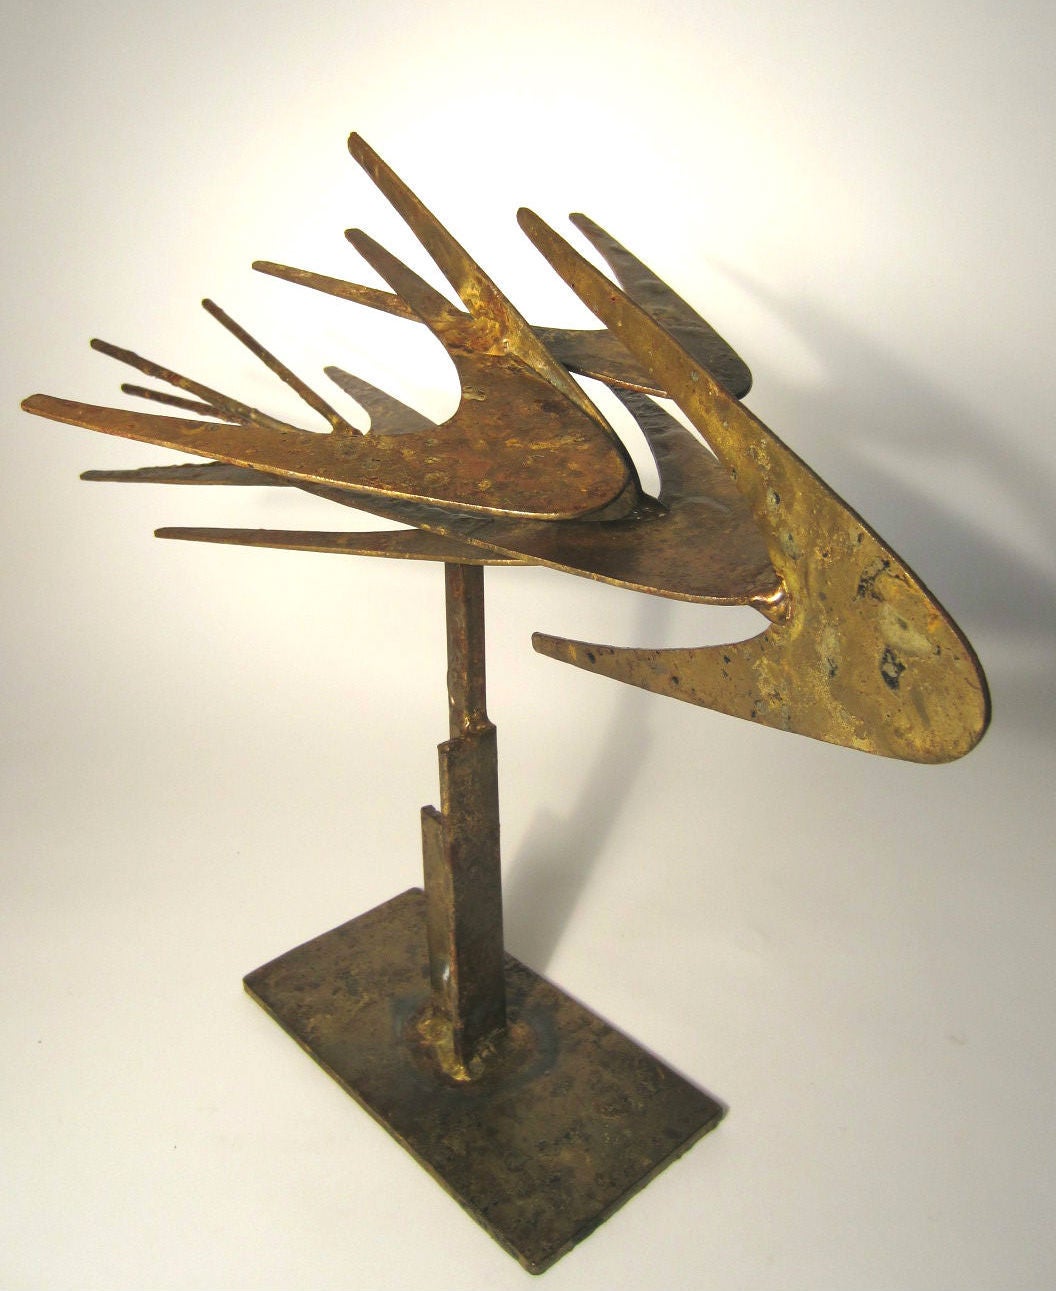 circa 1950's welded steel with dripping bronzed finish table top sculpture in a Paul Evans style.
Extremely artful modernist design. Un-signed